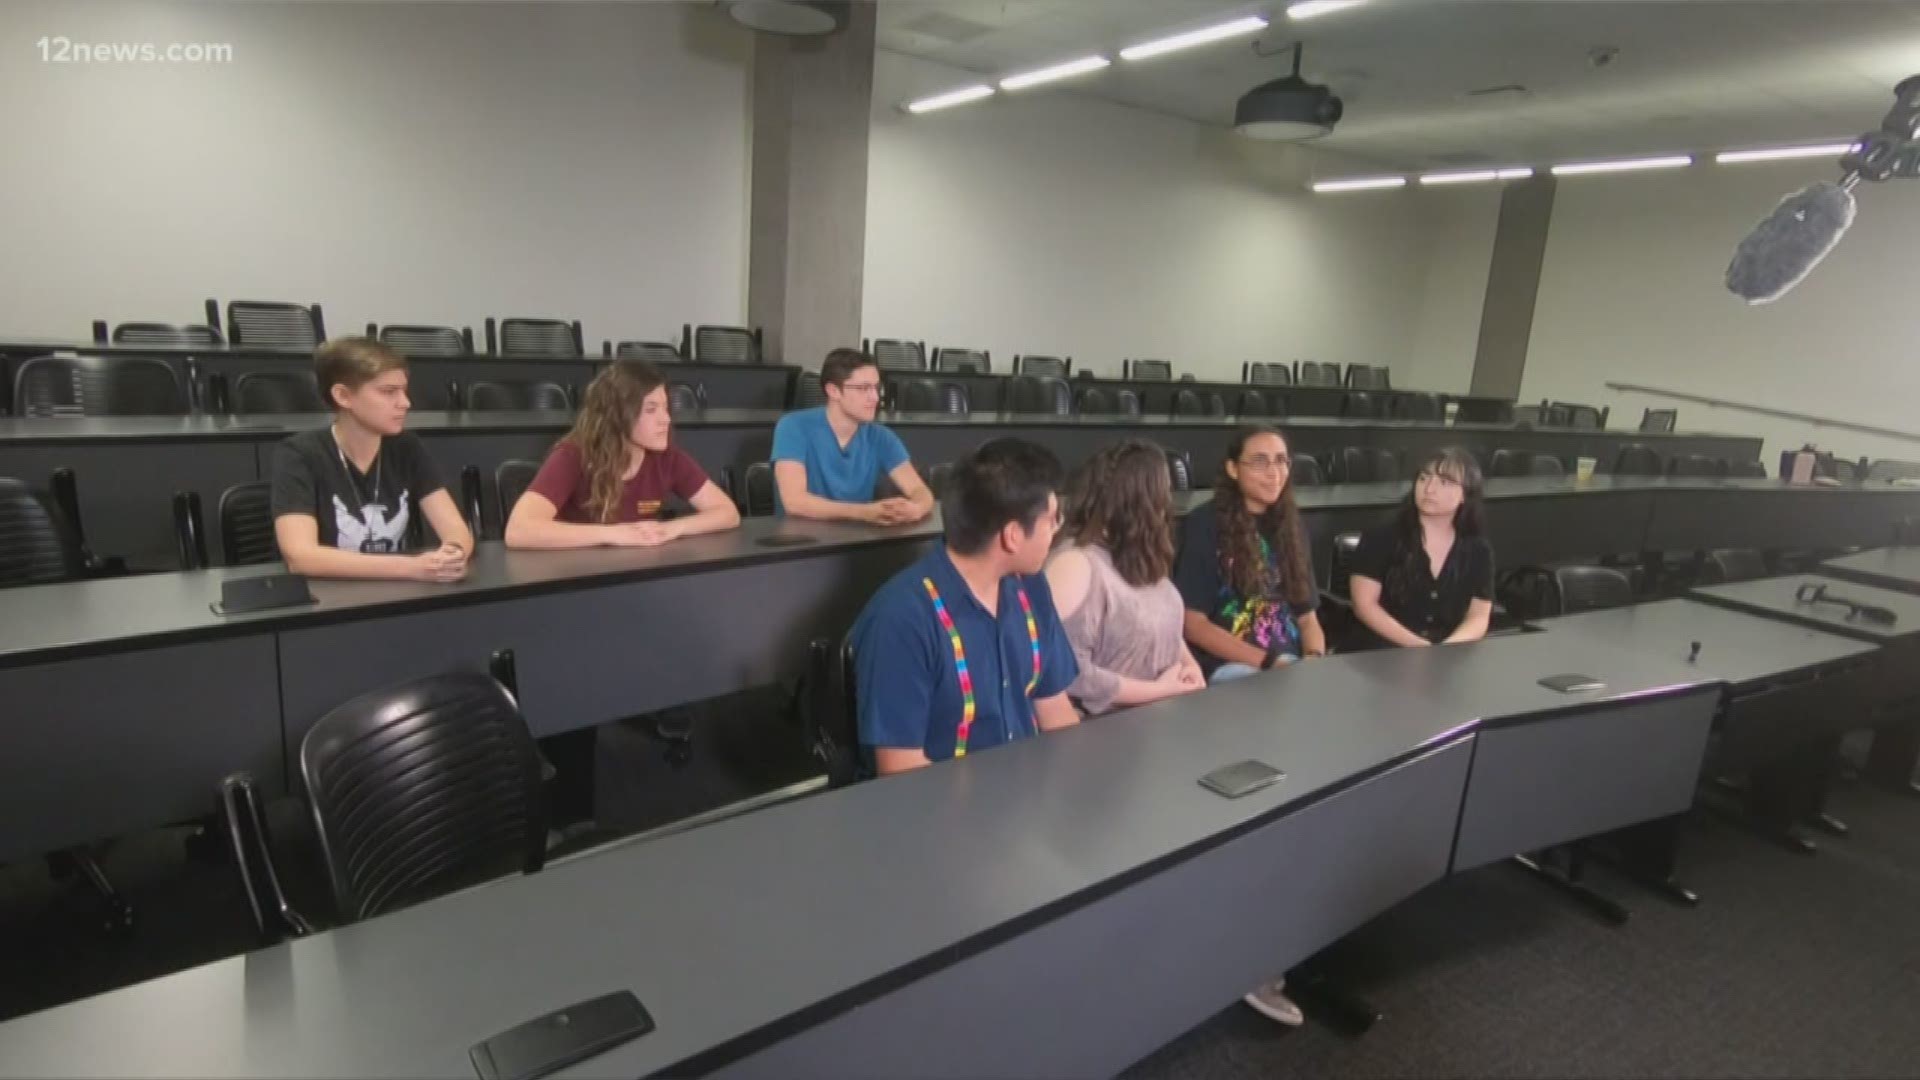 Before classes moved online, 12 News talked to a group of students on ASU's campus about the issues they care about most.